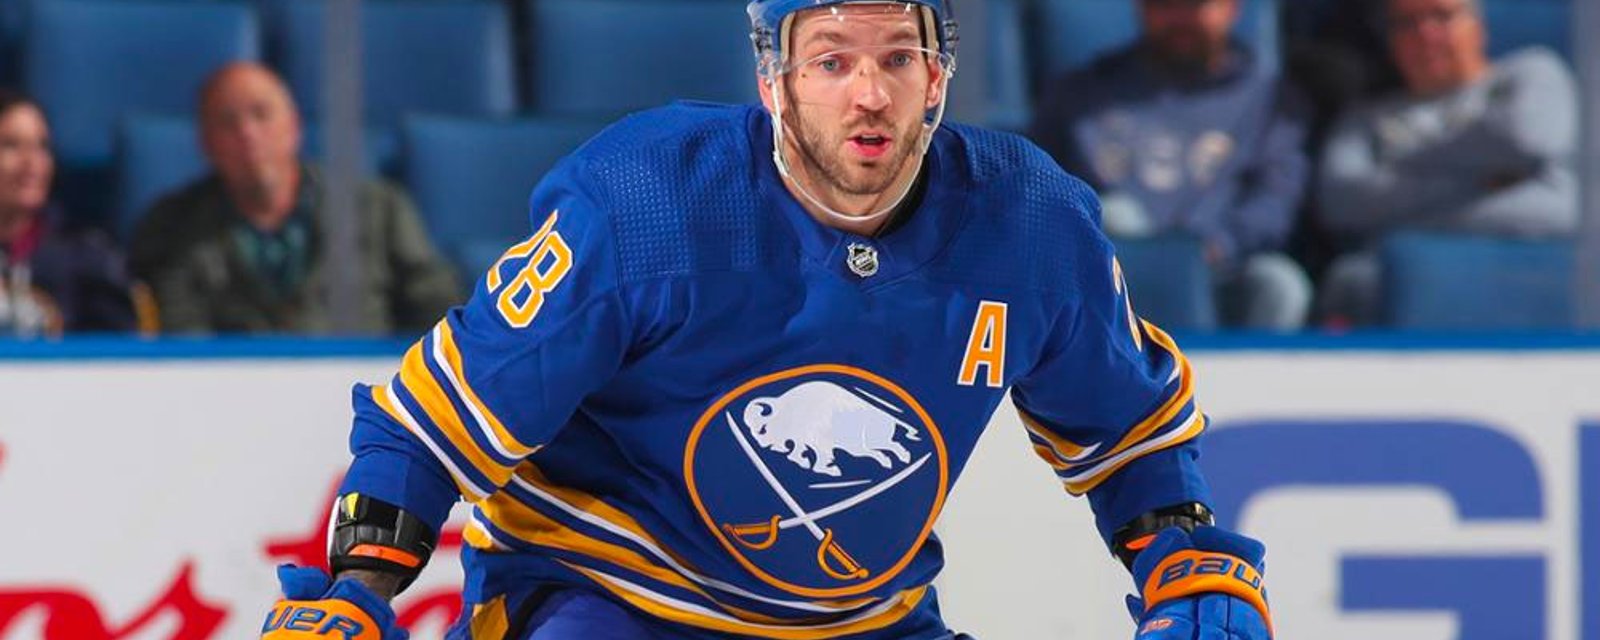 Sabres sign long-serving player Zemgus Girgensons to a contract extension